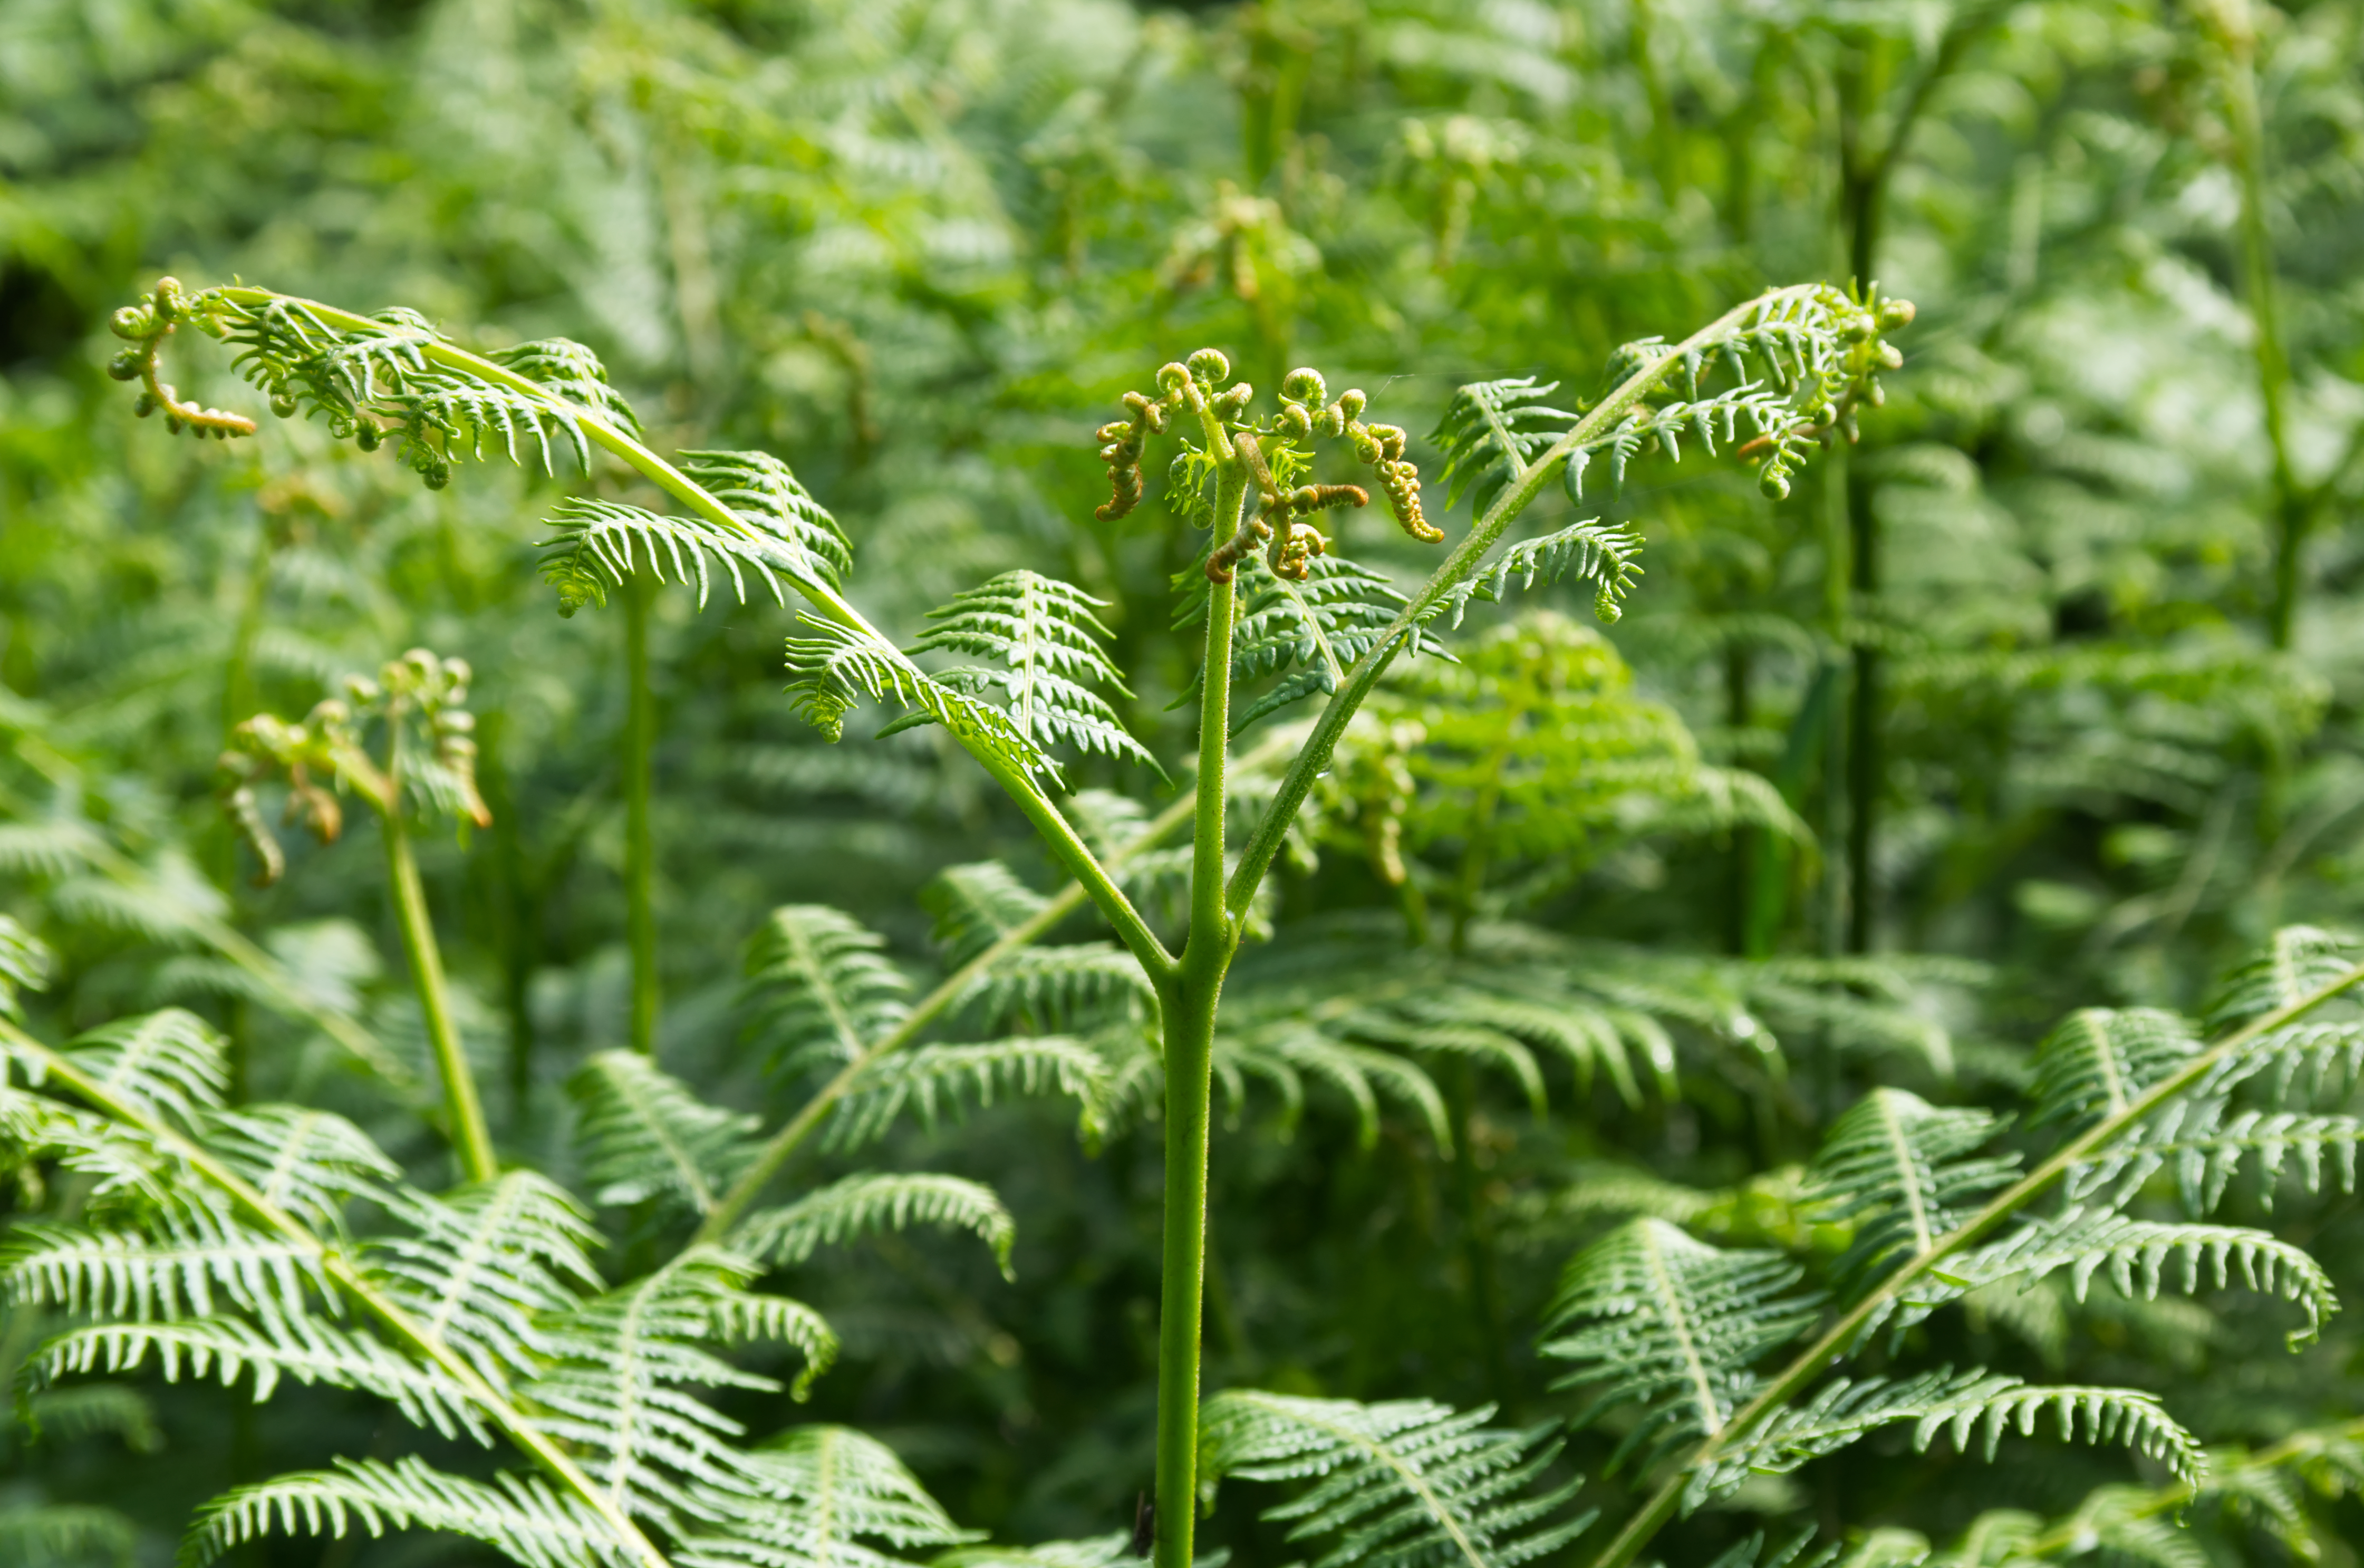 Ferns at Scalby, North Yorkshire